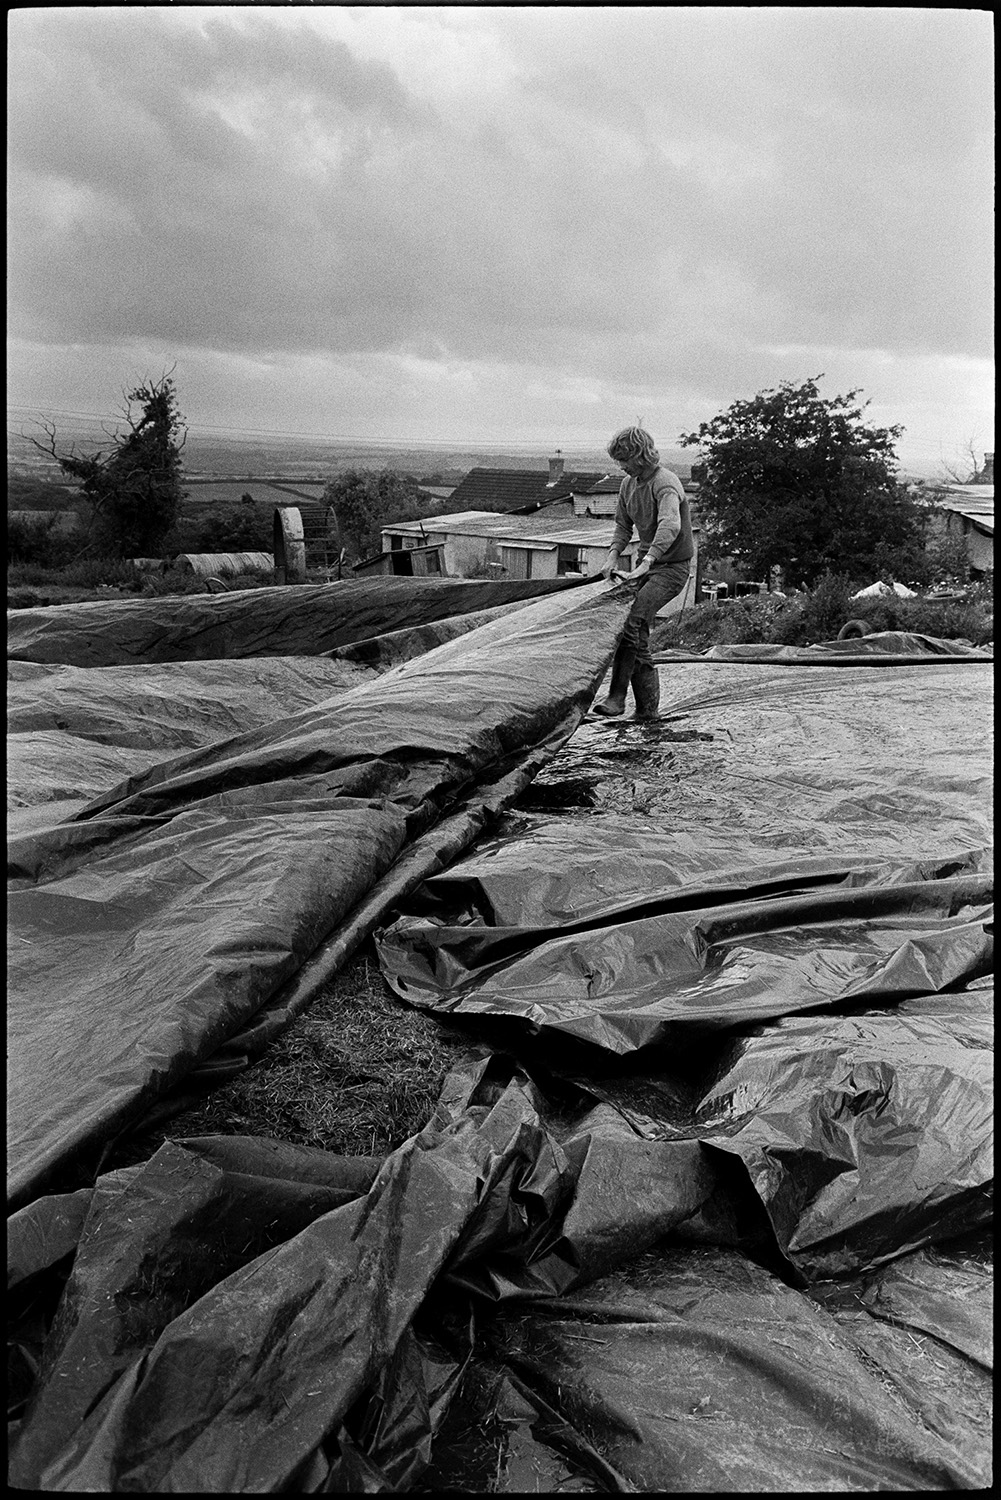 Farmer covering silage with large sheet of polythene. 
[A man covering a mound of silage with a polythene sheet at Upcott, Dolton. Sheds and rooftops can be seen in the background.]